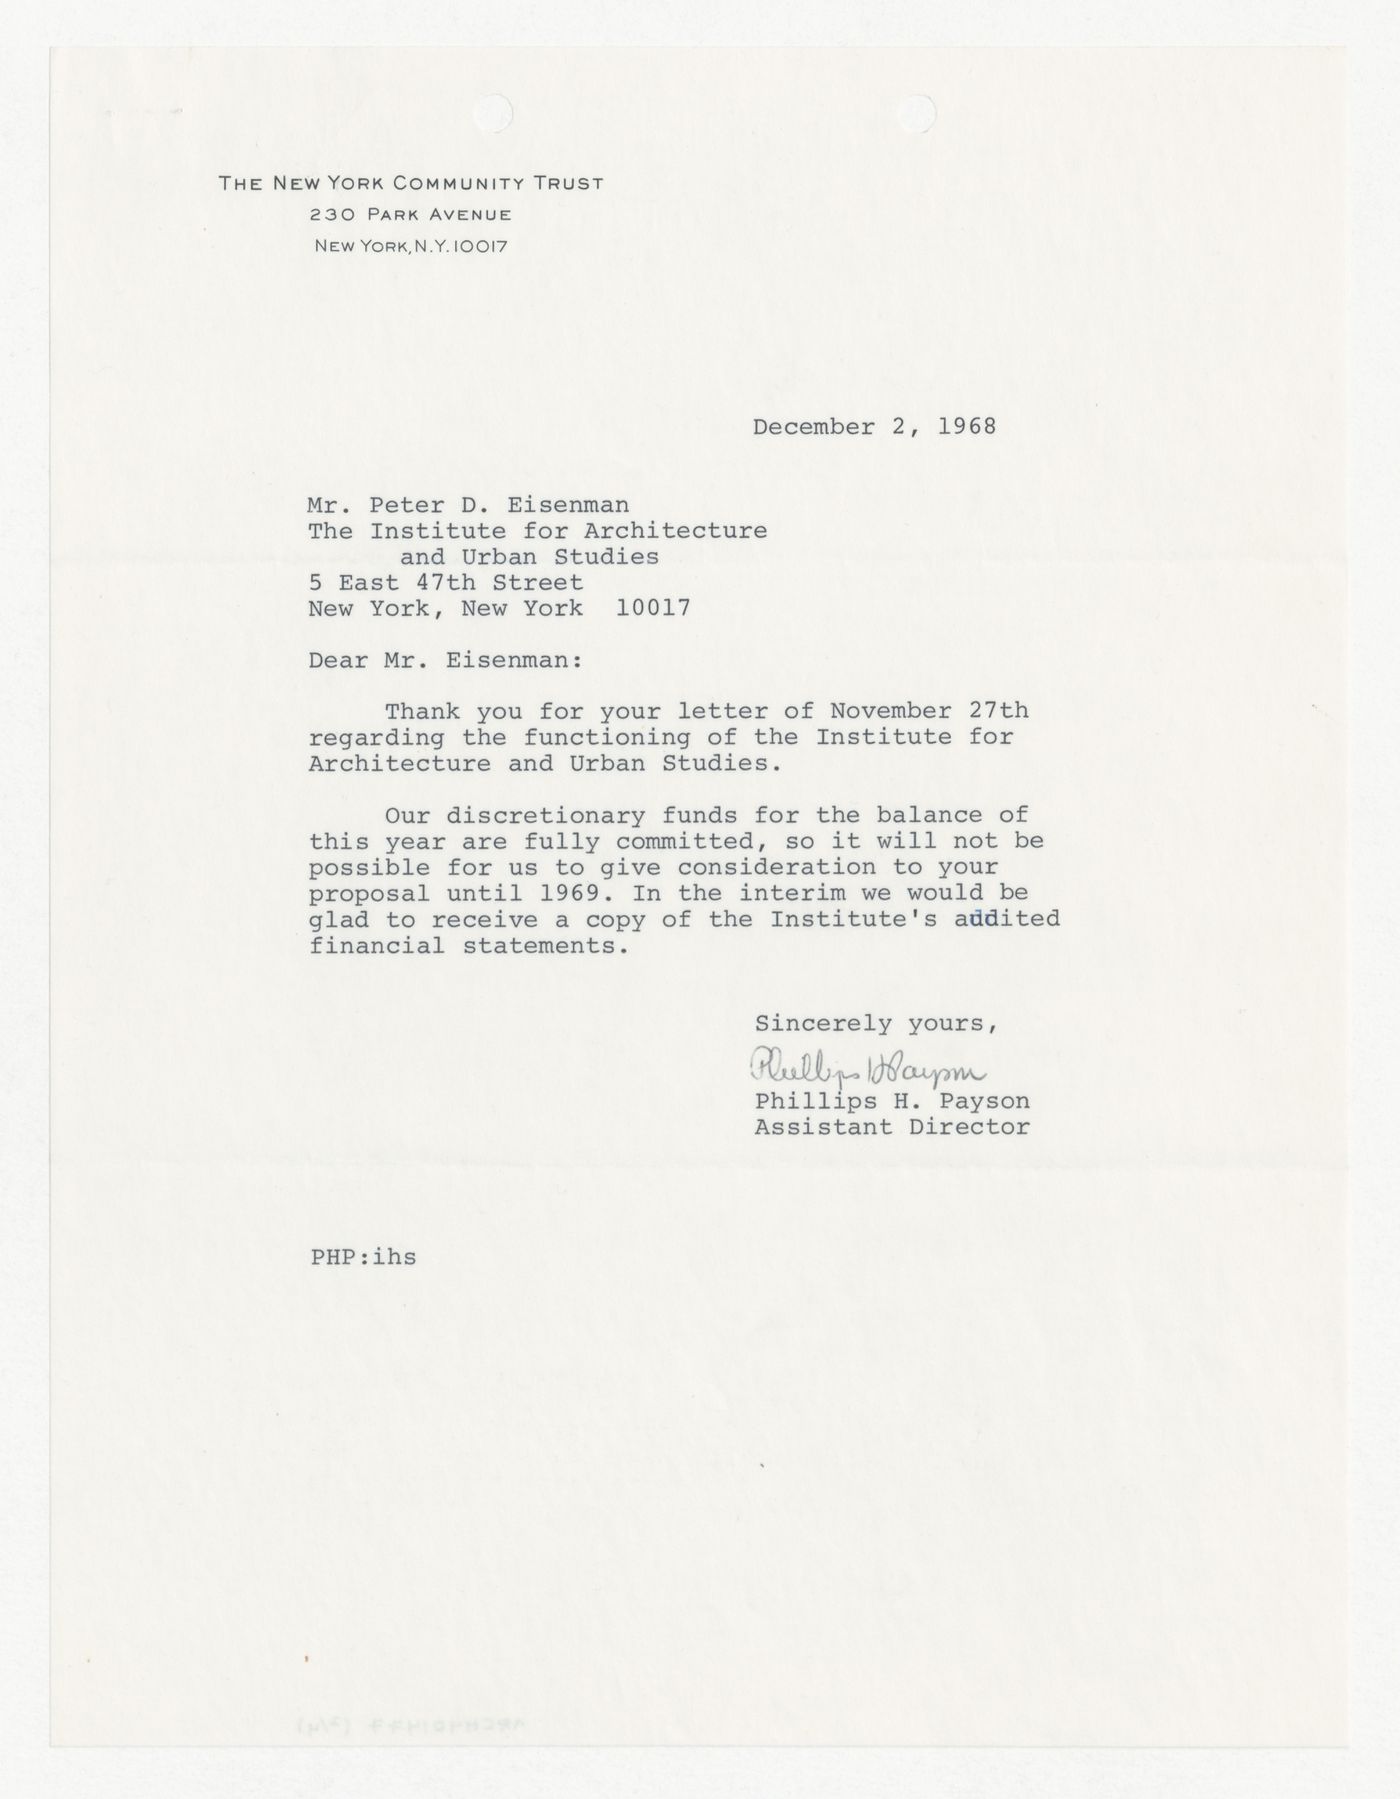 Correspondence between Peter D. Eisenman and Phillips H. Payson about a donation request